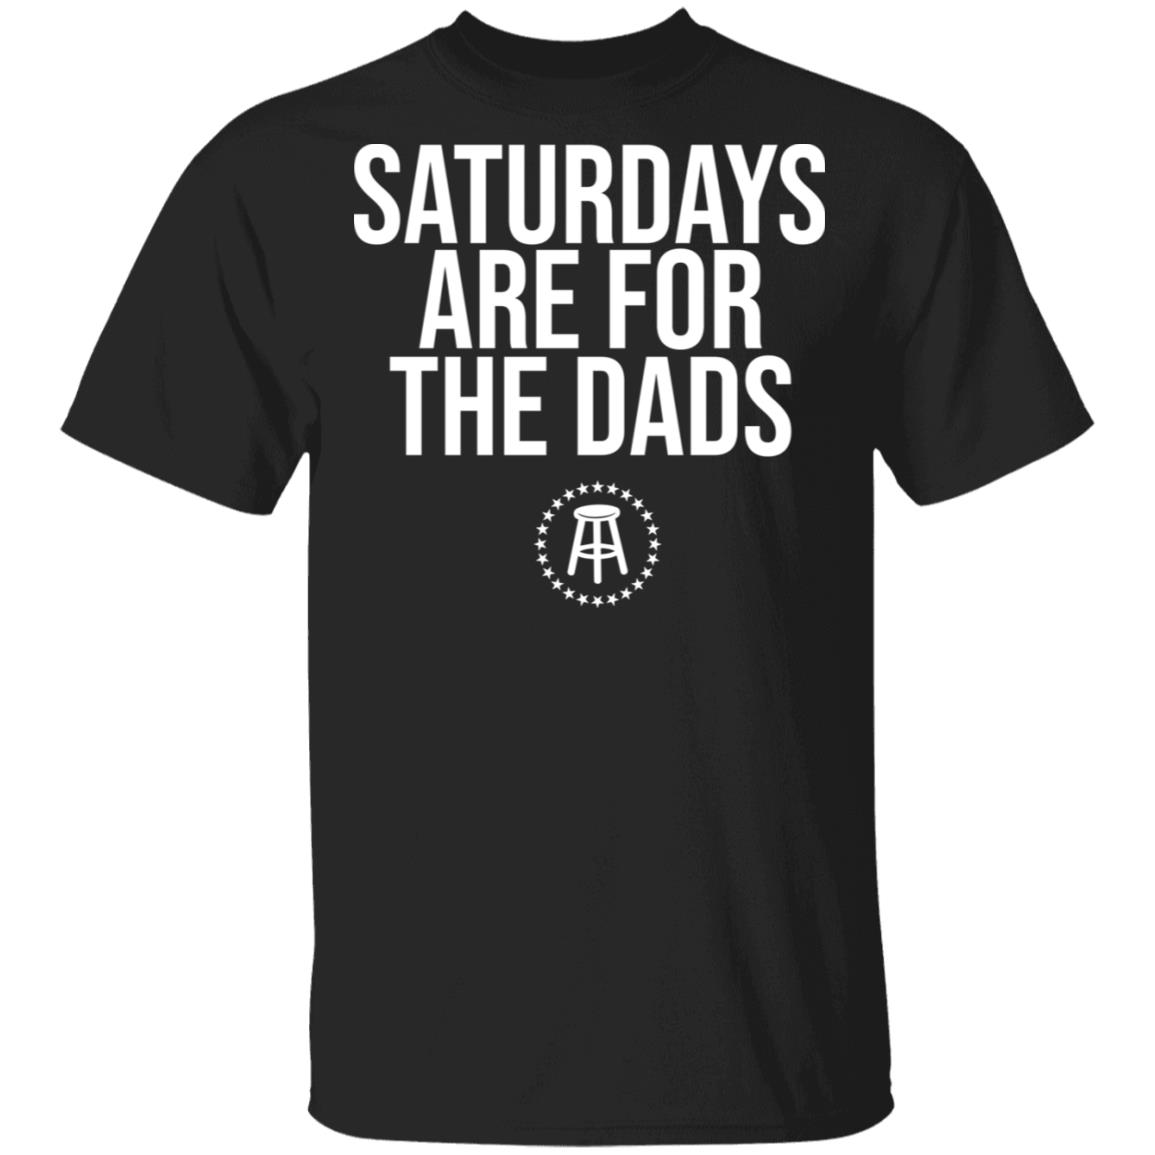 Saturdays Are For The Dads II Tee - Barstool Sports